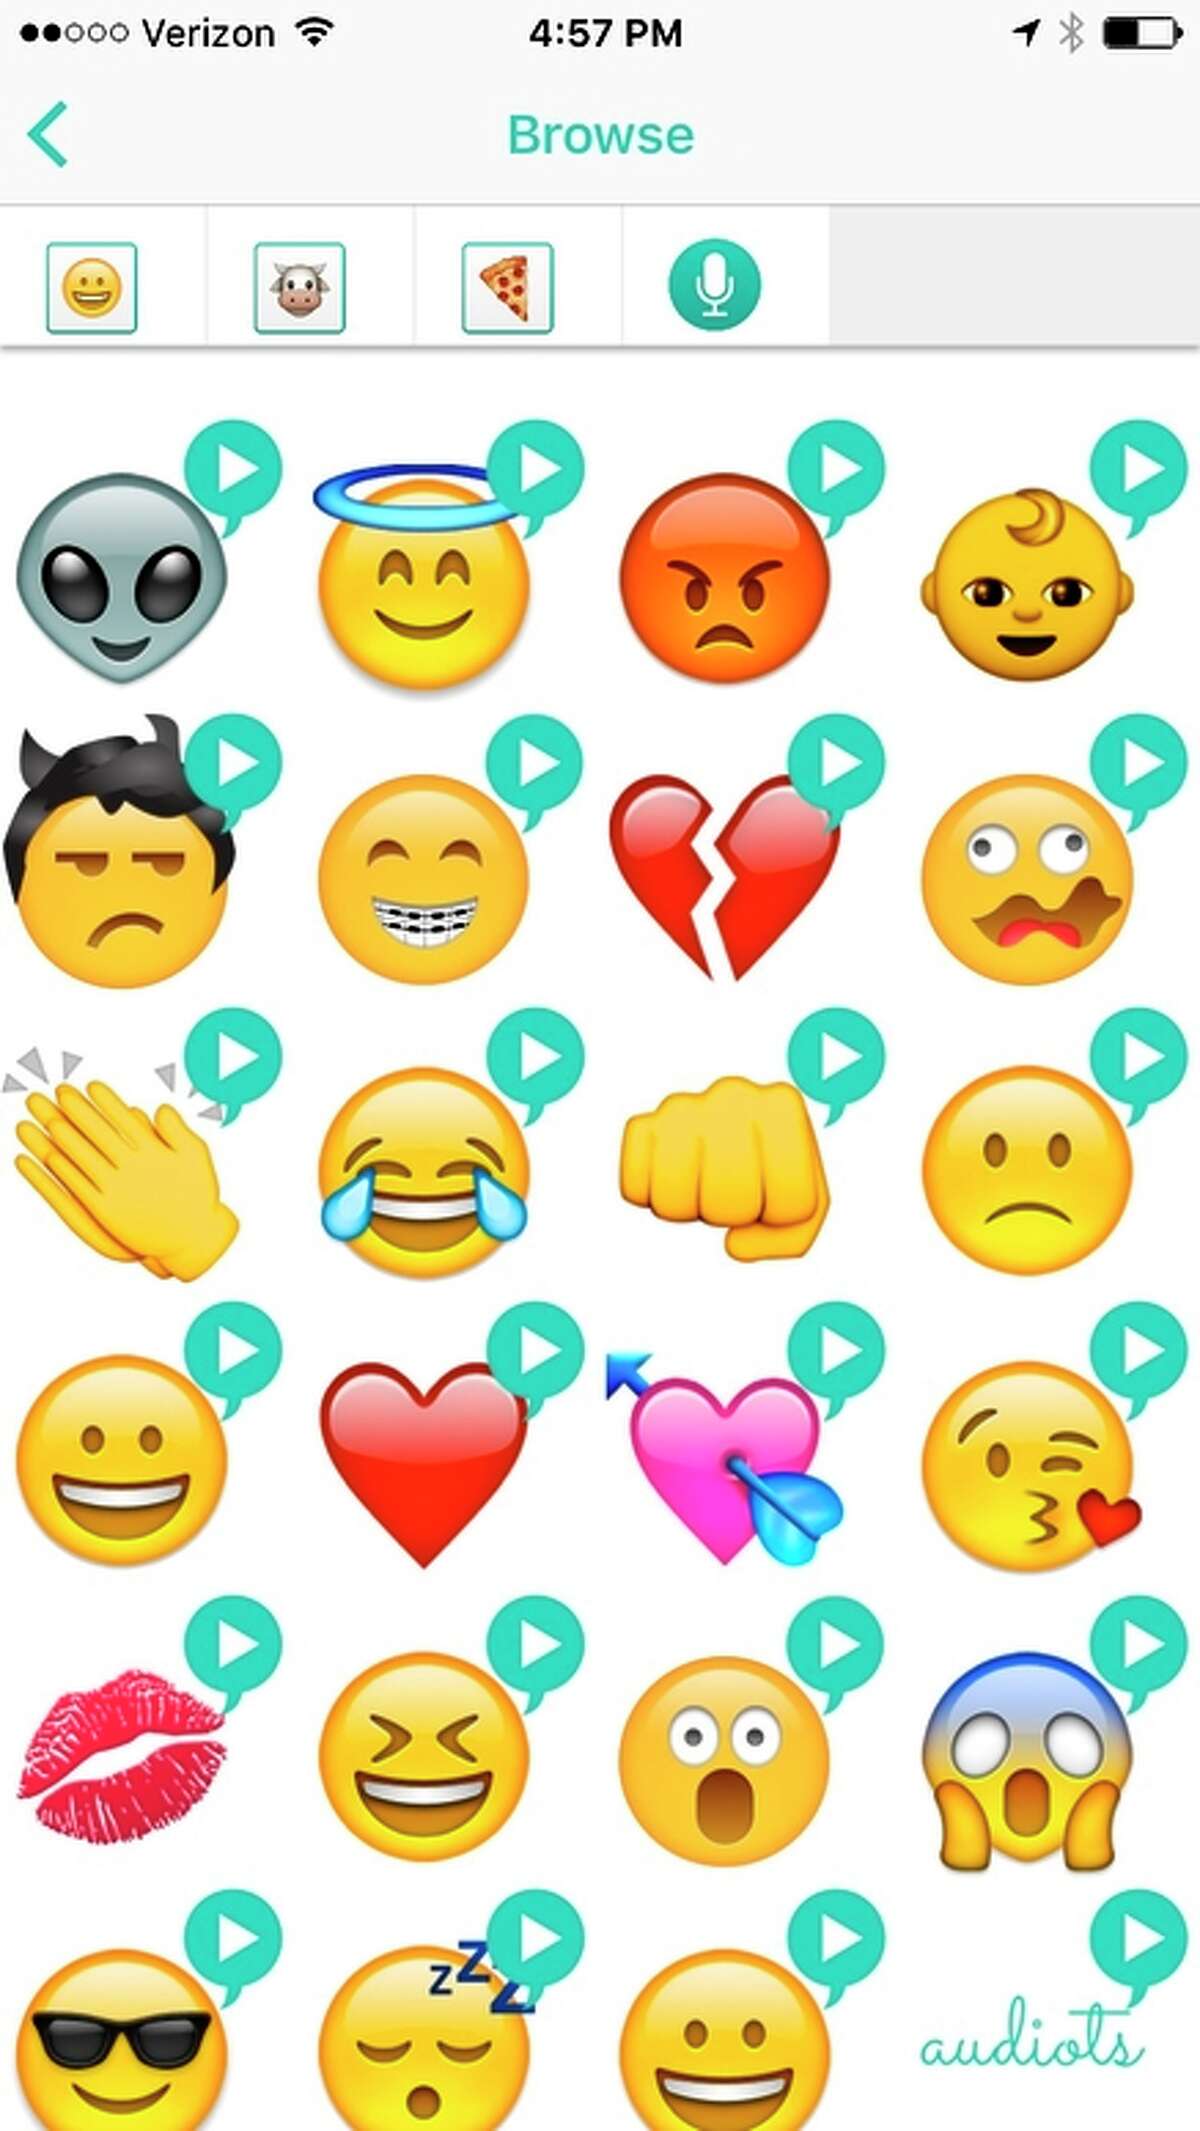 The Audiots iOS app lets you send emoji with prerecorded audio clips.